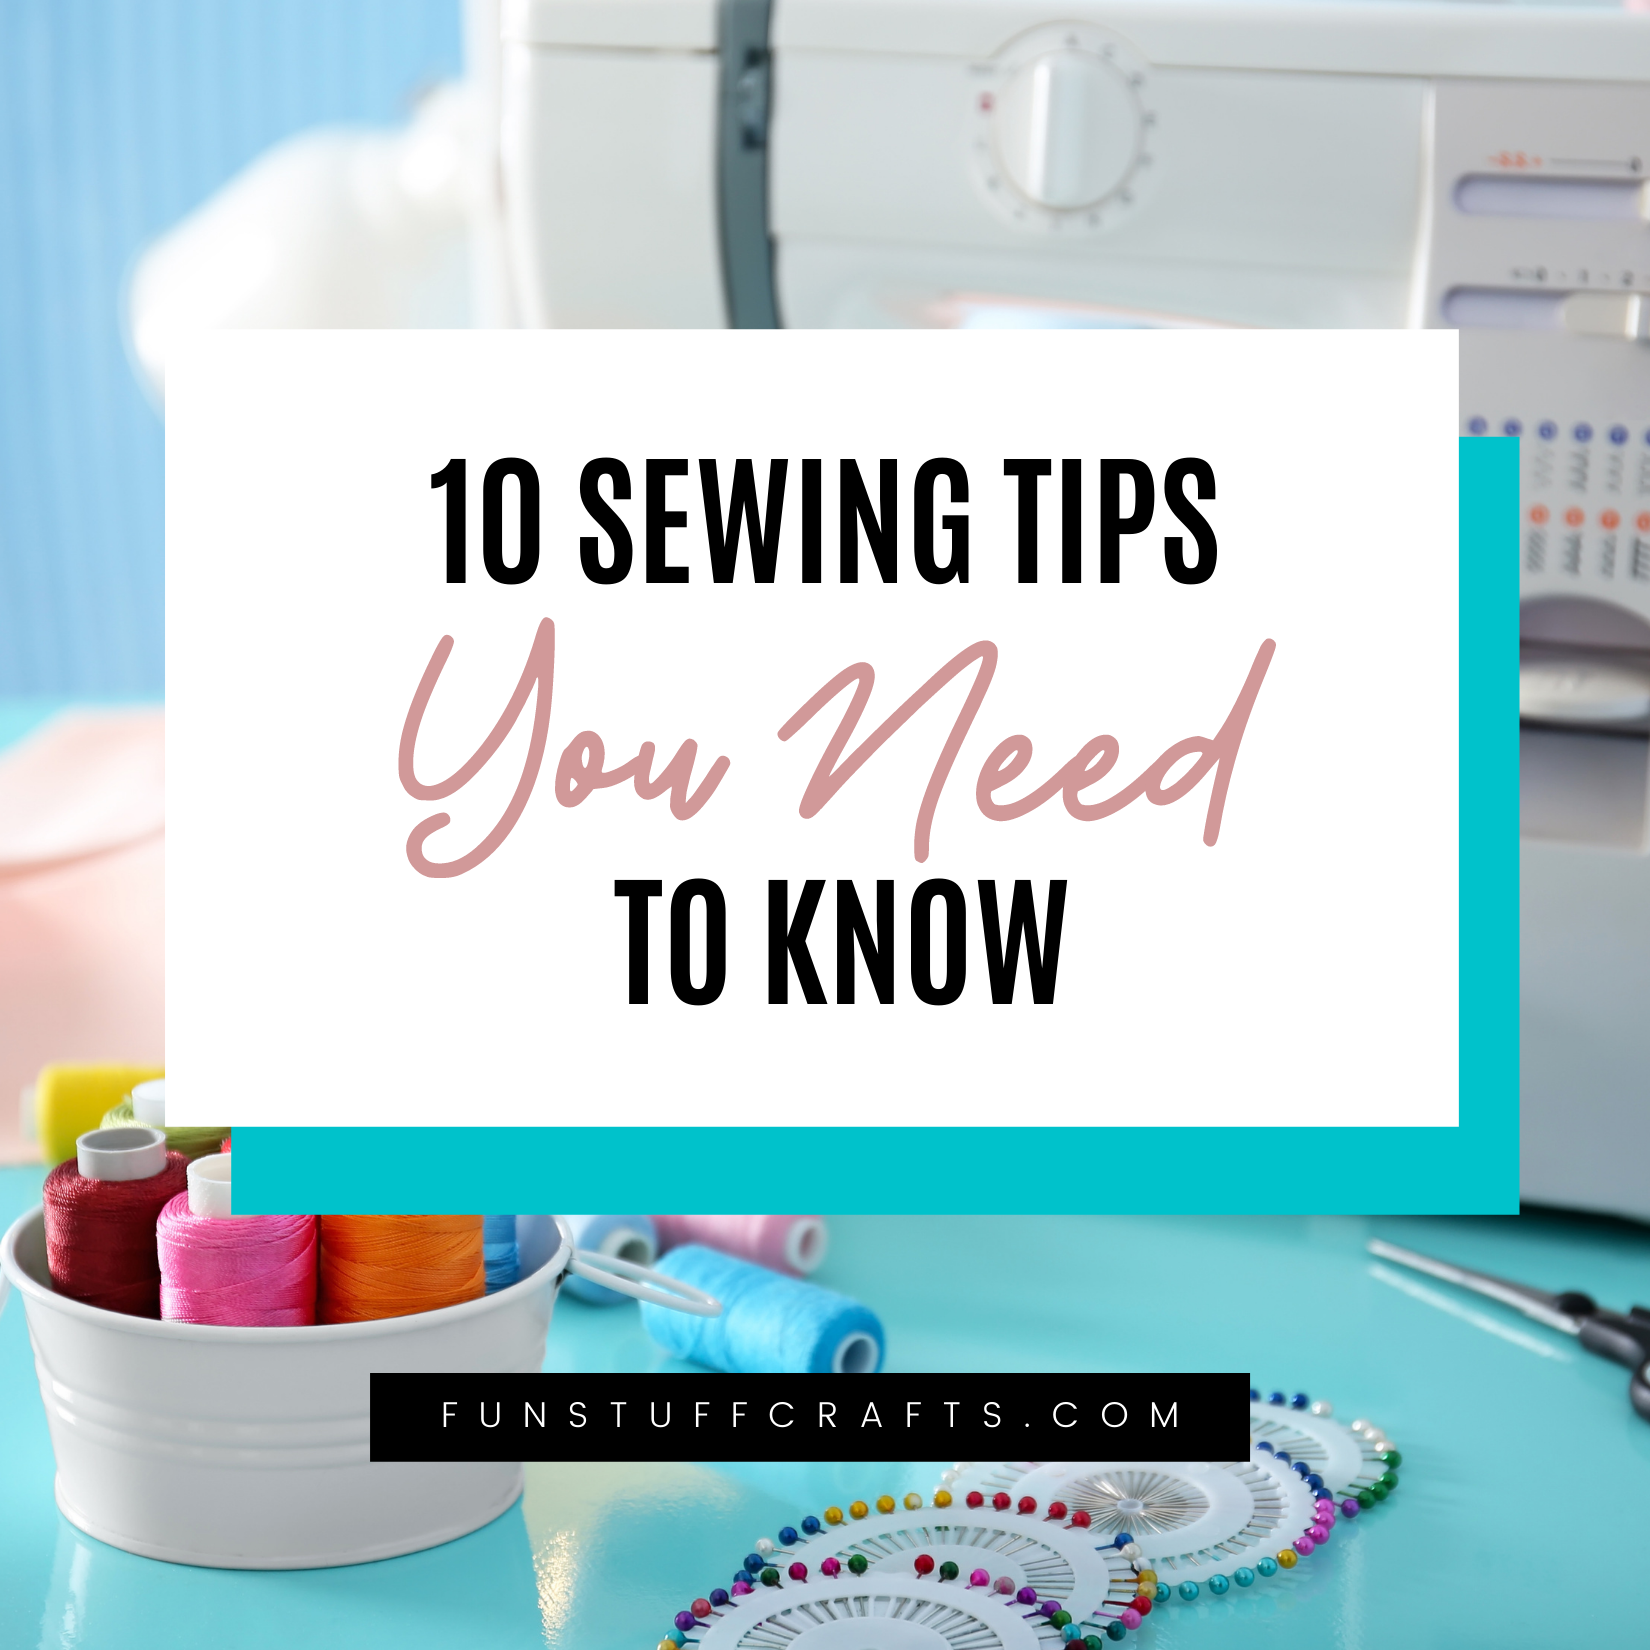 Sewing Tips | 10 Tips You Need to Know! - Fun Stuff Crafts